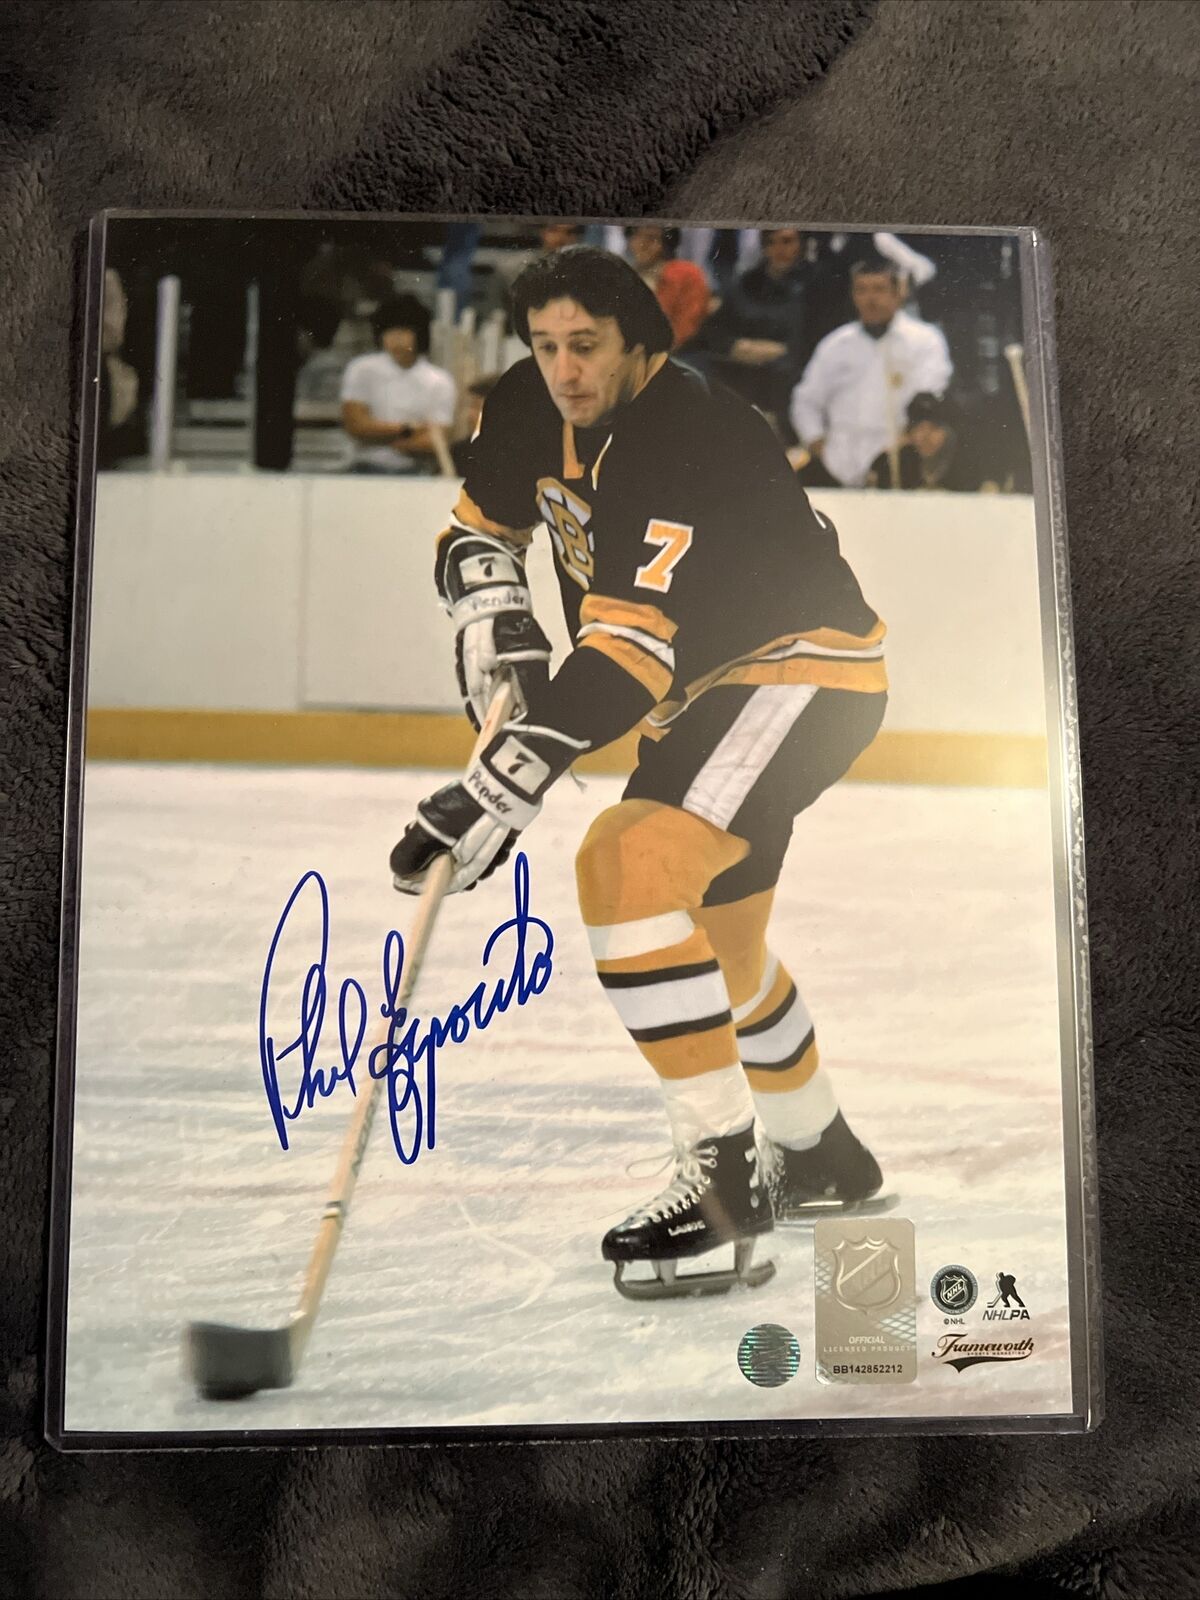 autographed hockey Picture Of Phil Esposito